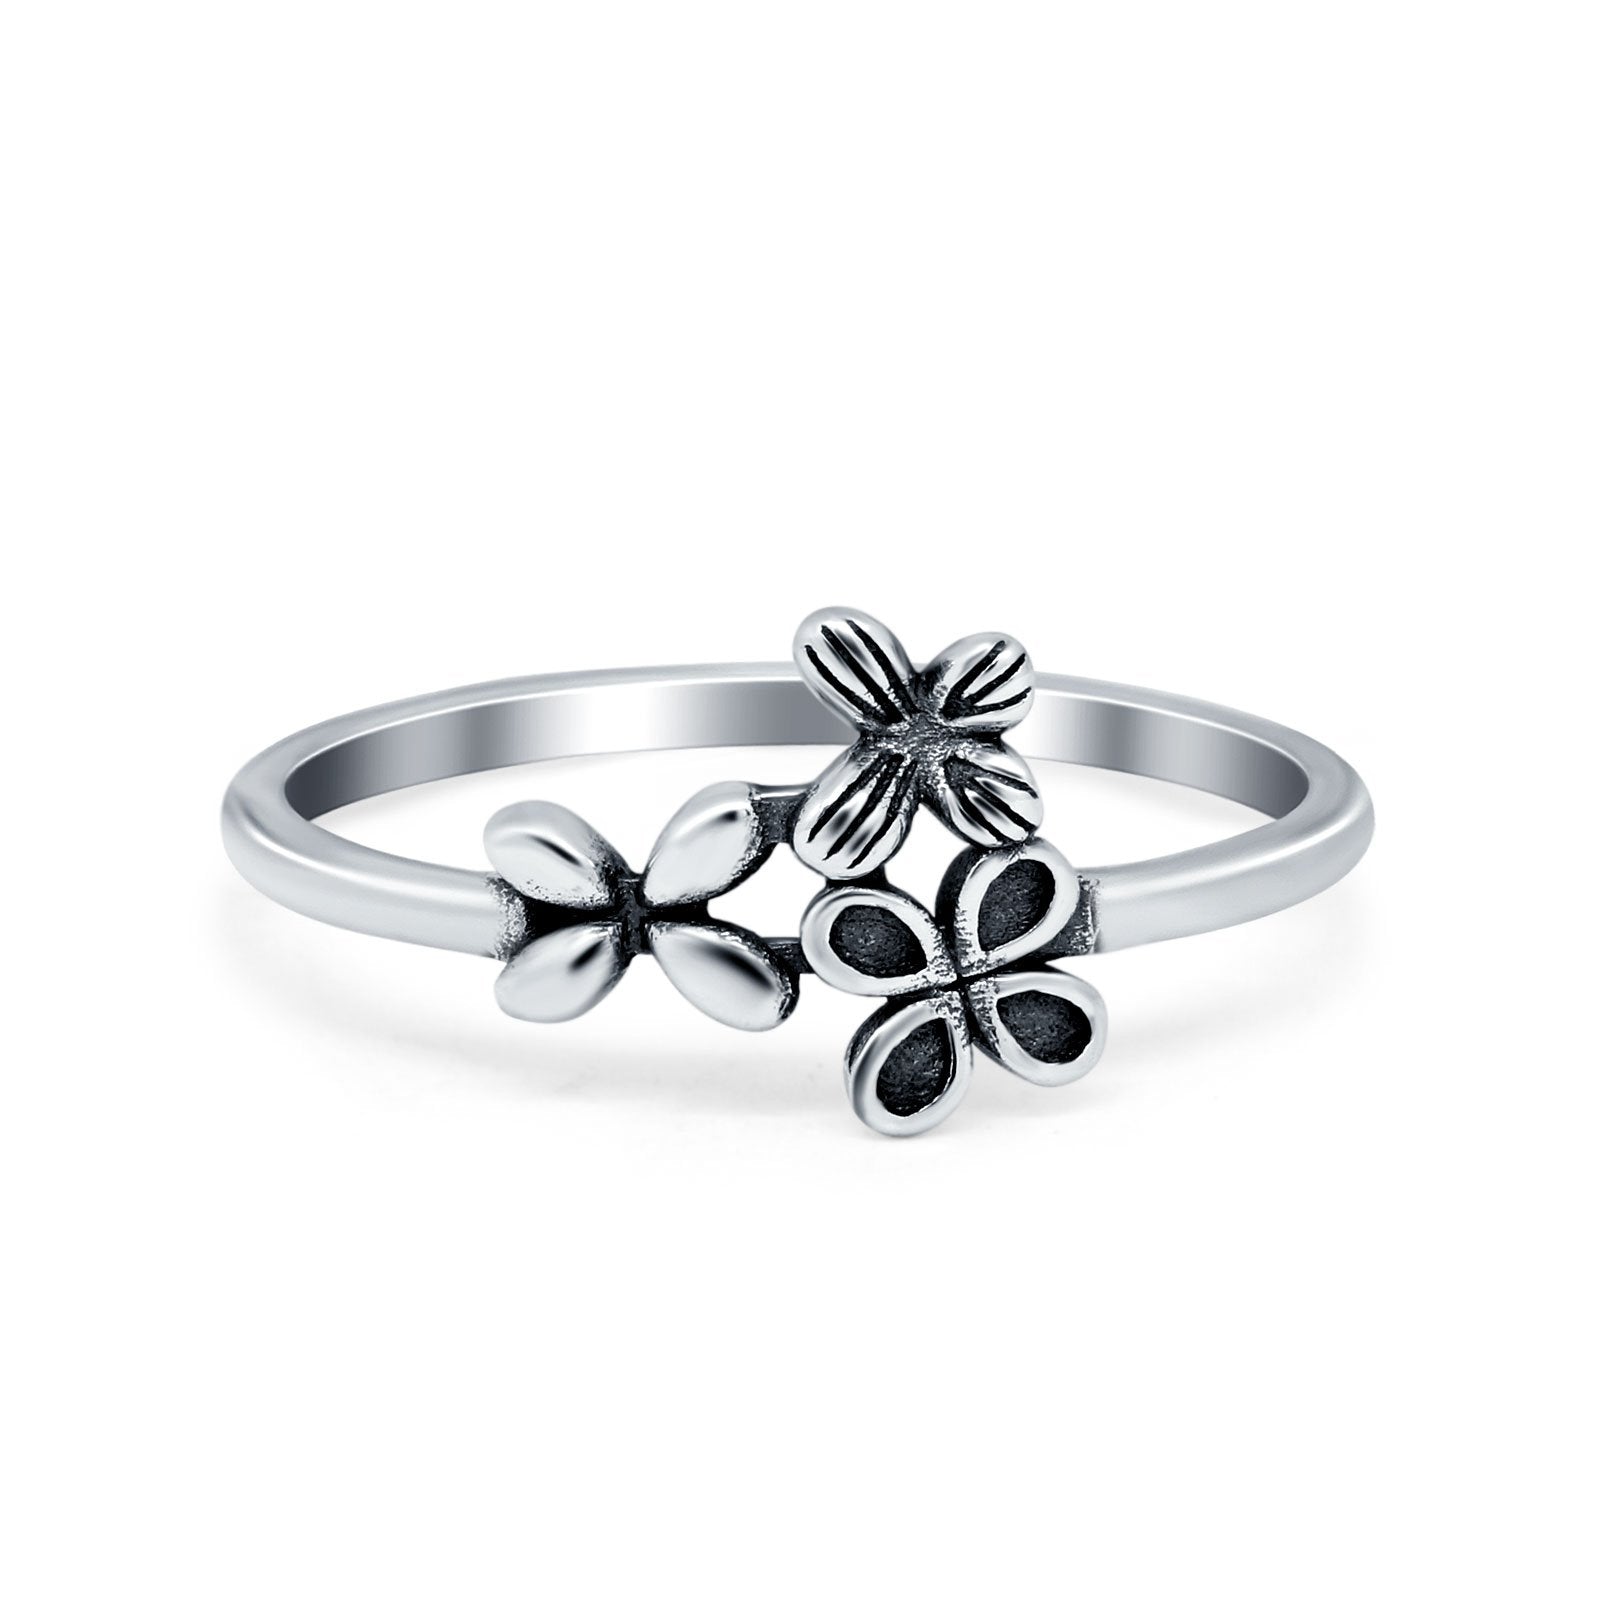 Three Butterflies Ring Plain Band Oxidized 925 Sterling Silver